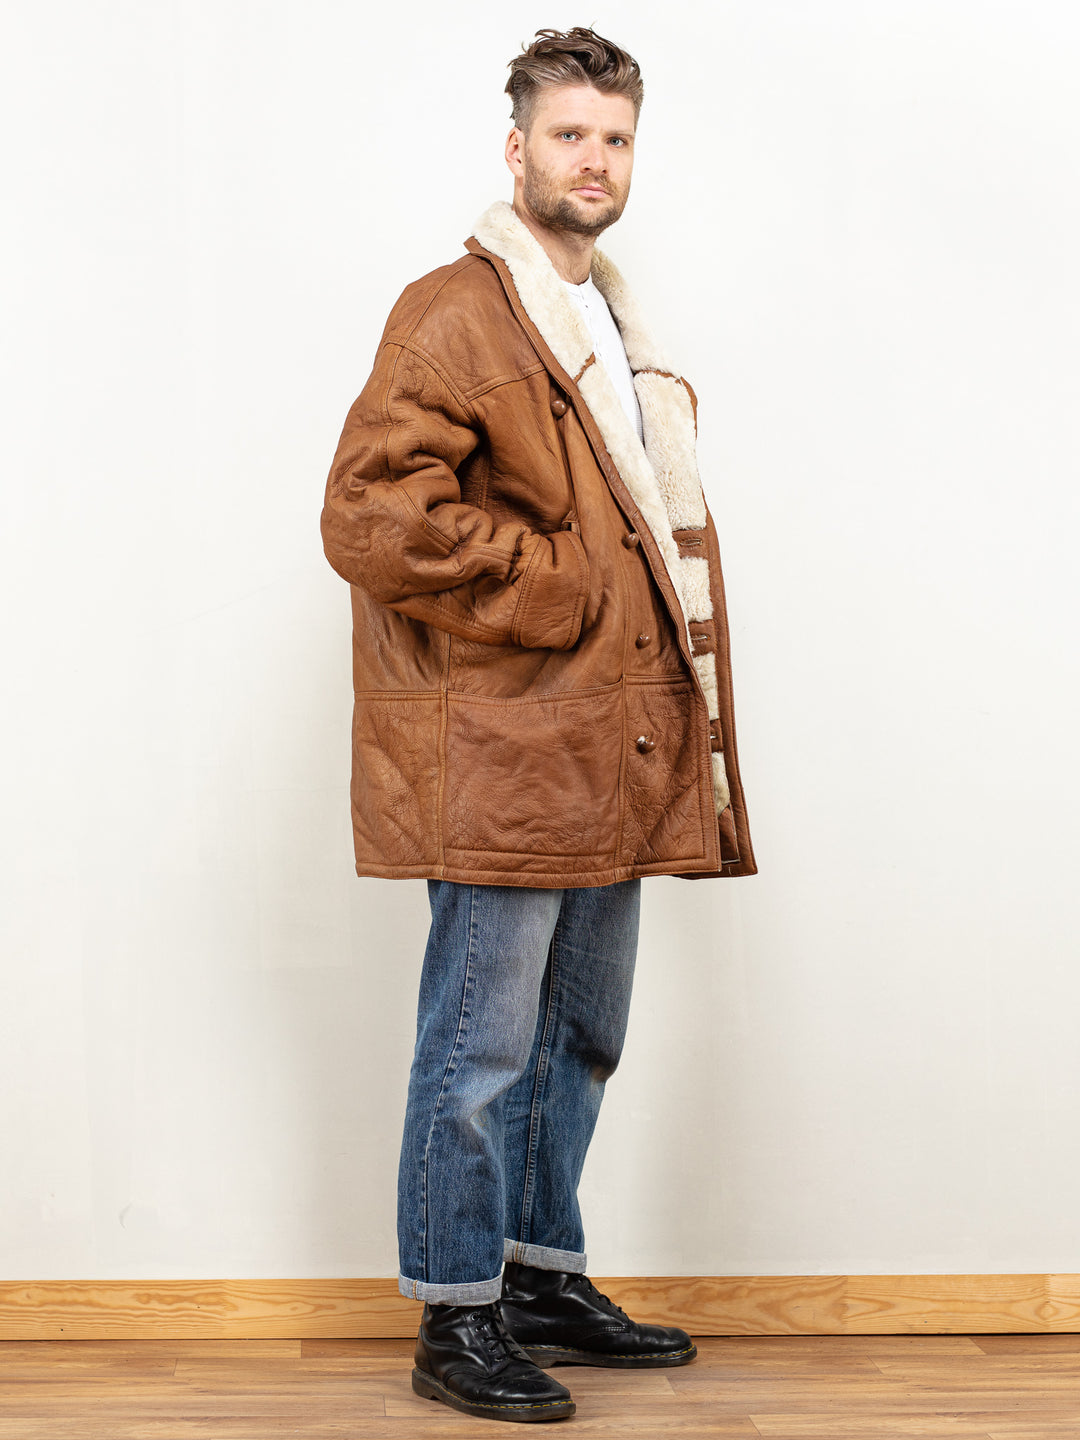 Men Sheepskin Coat 80's leather shearling sustainable overcoat brown warm winter outerwear boho style casual coat size extra large XL